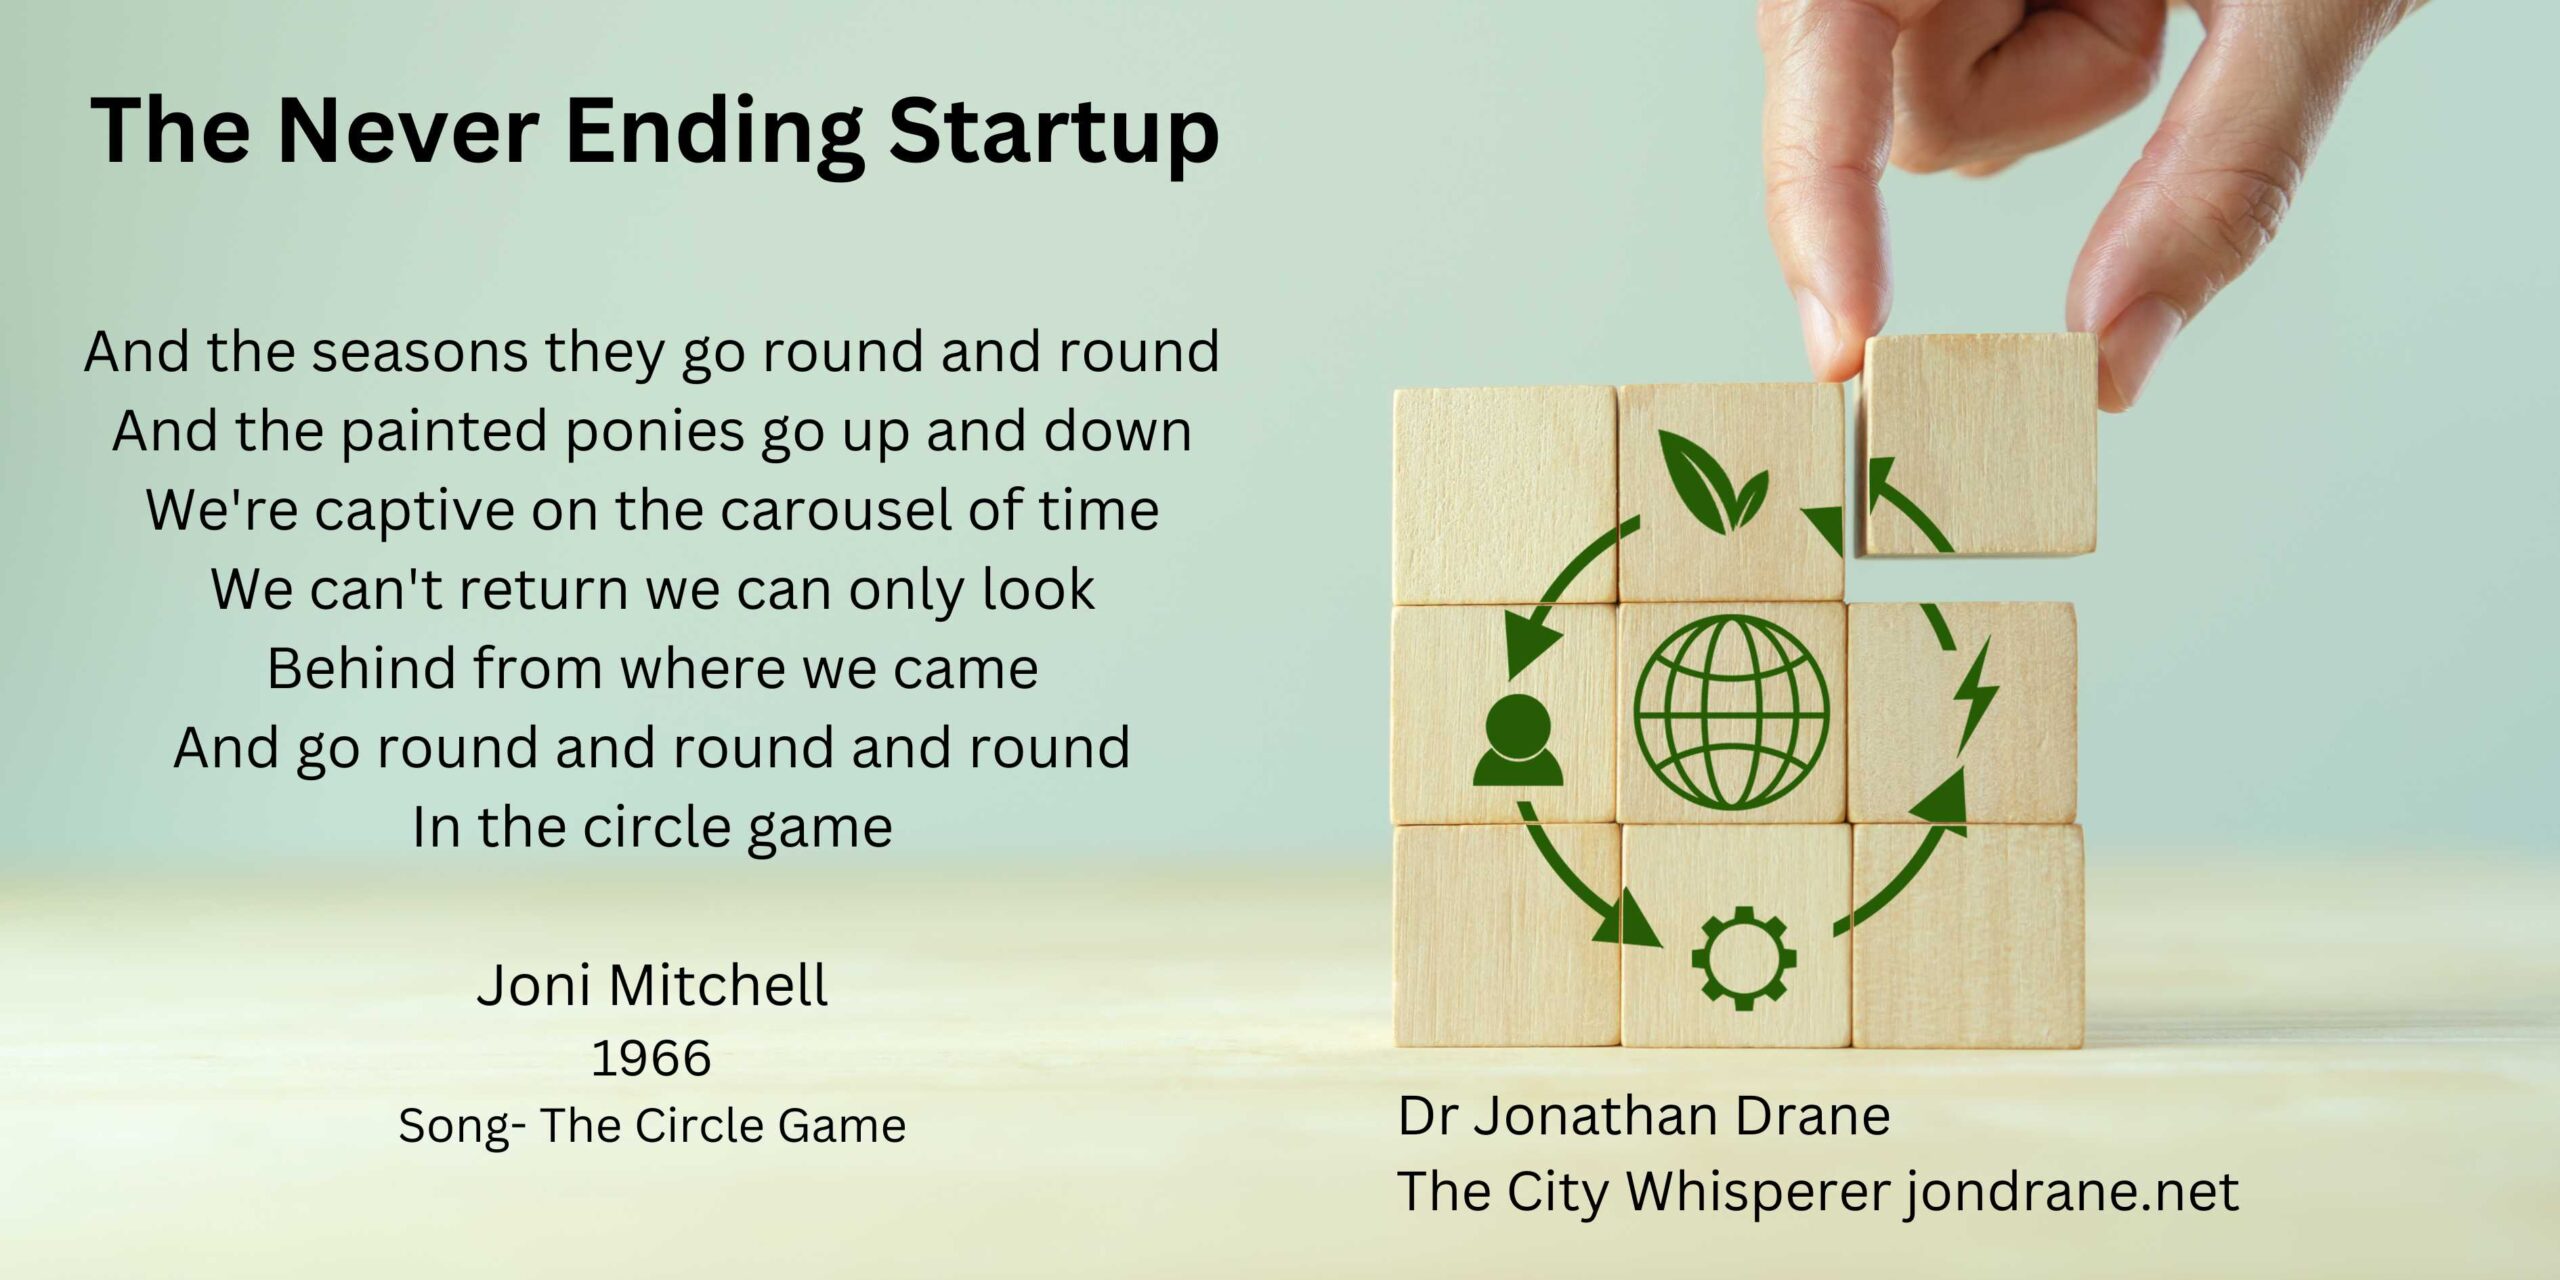 Startup journey and stories. The circle game , joni mitchel, quote the seasons they go round and round. Dr Jon Drane, The Never Ending startup podcast